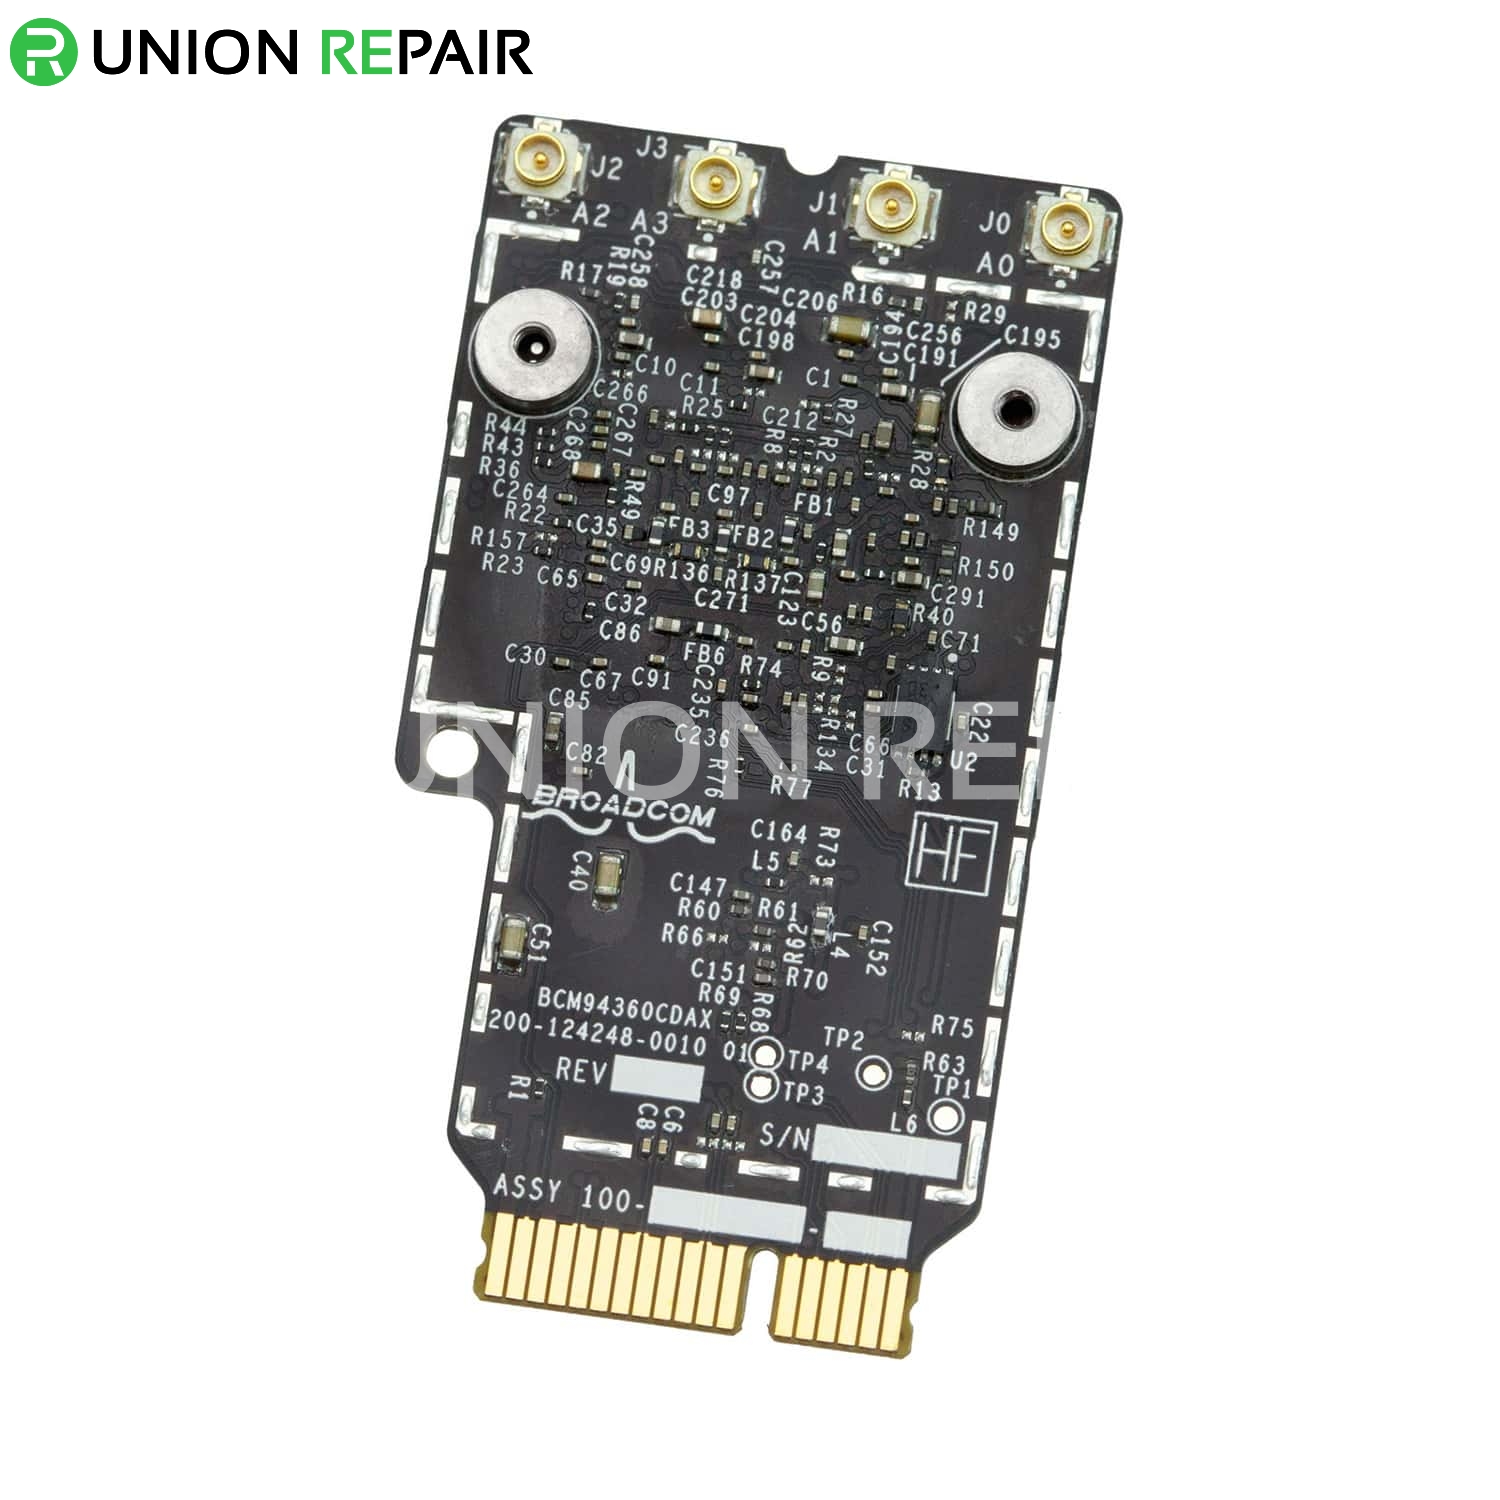  AirPort Wireless Network Card #BCM94360CD for iMac A1418/A1419/A1481, fig. 1 